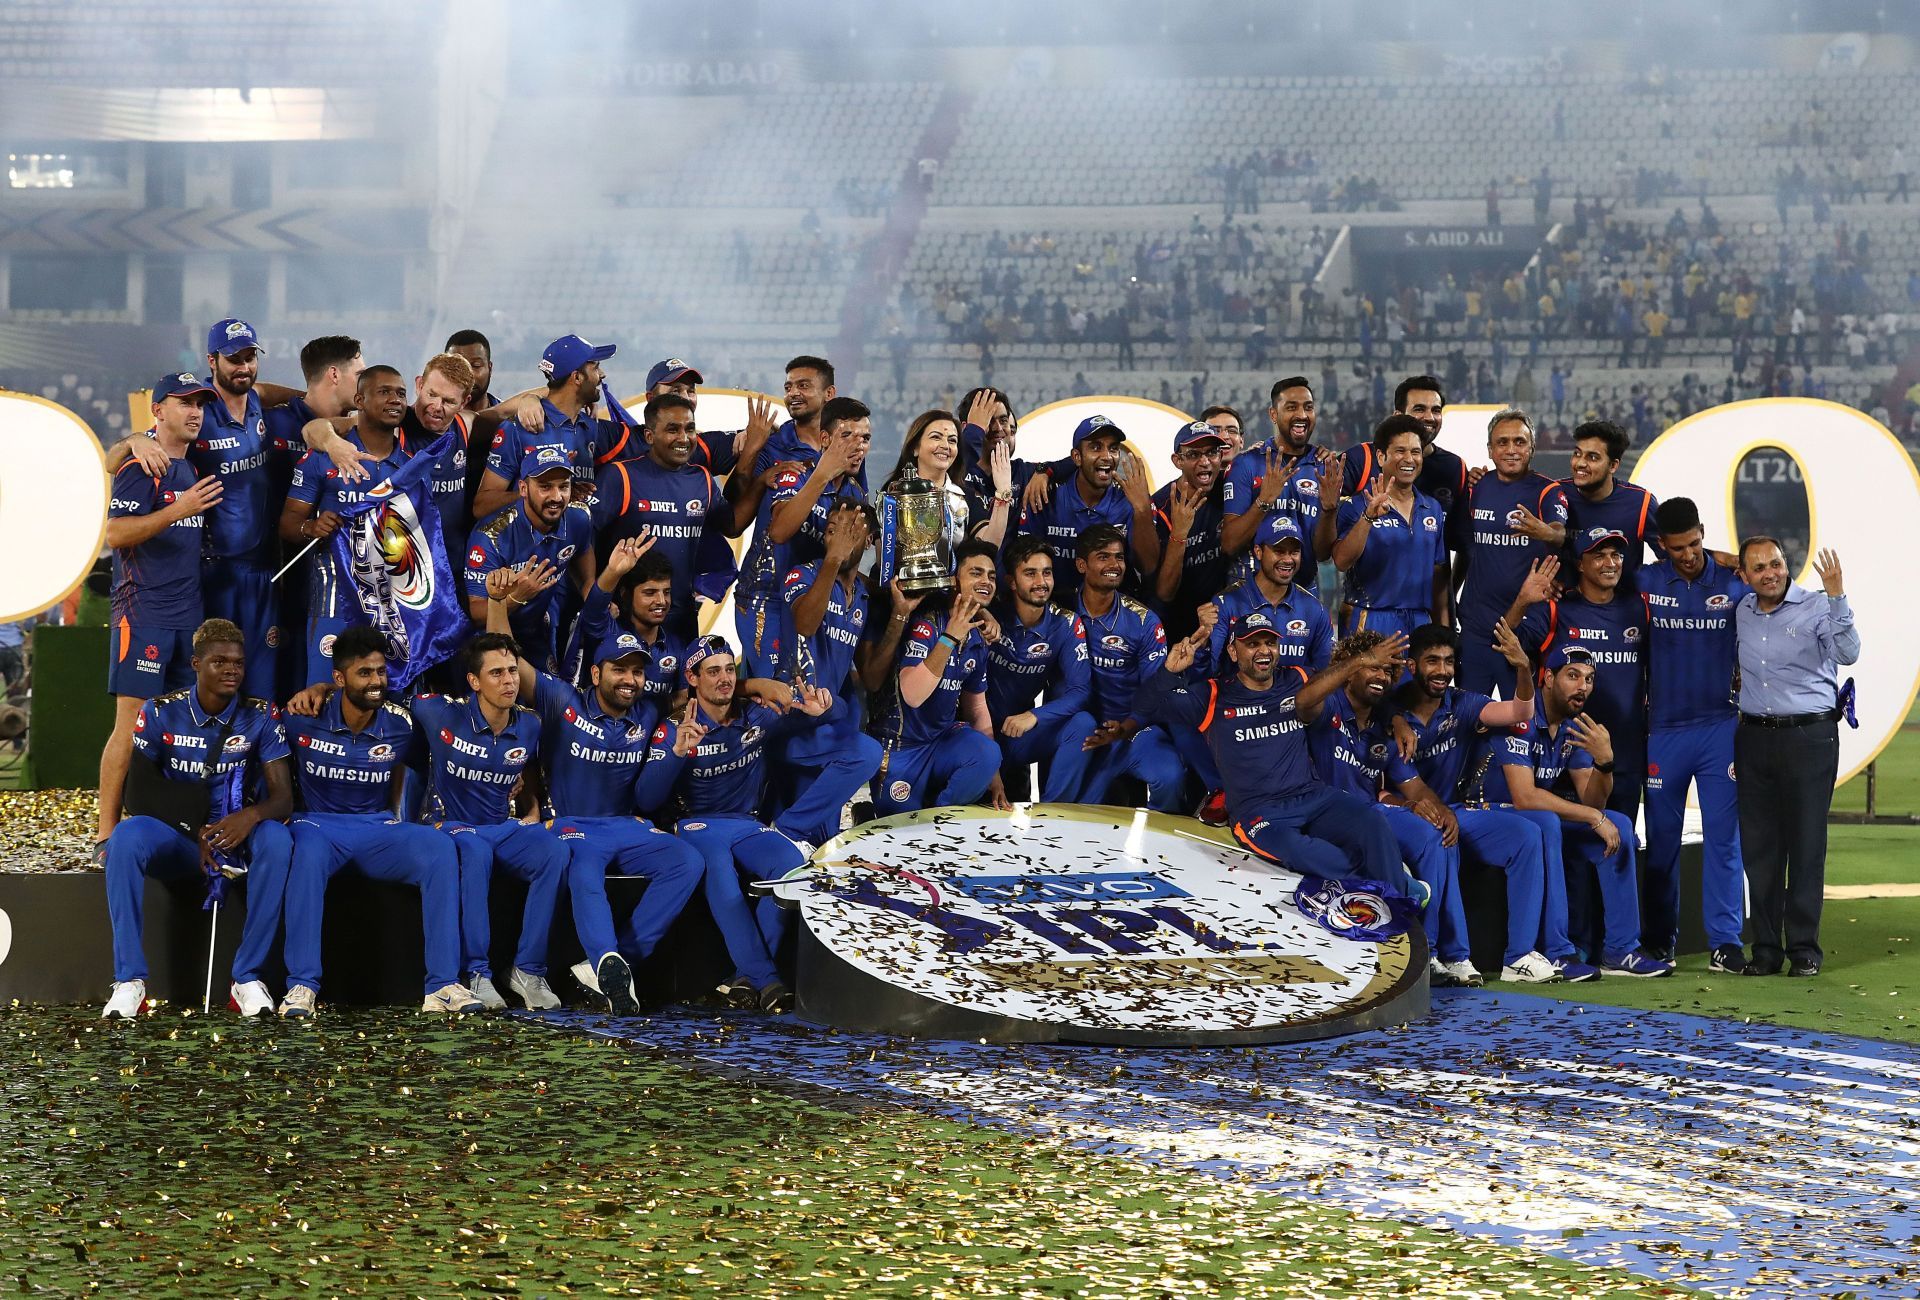 Mumbai Indians, 5 times IPL champions, have lost both their matches so far in IPL 2022